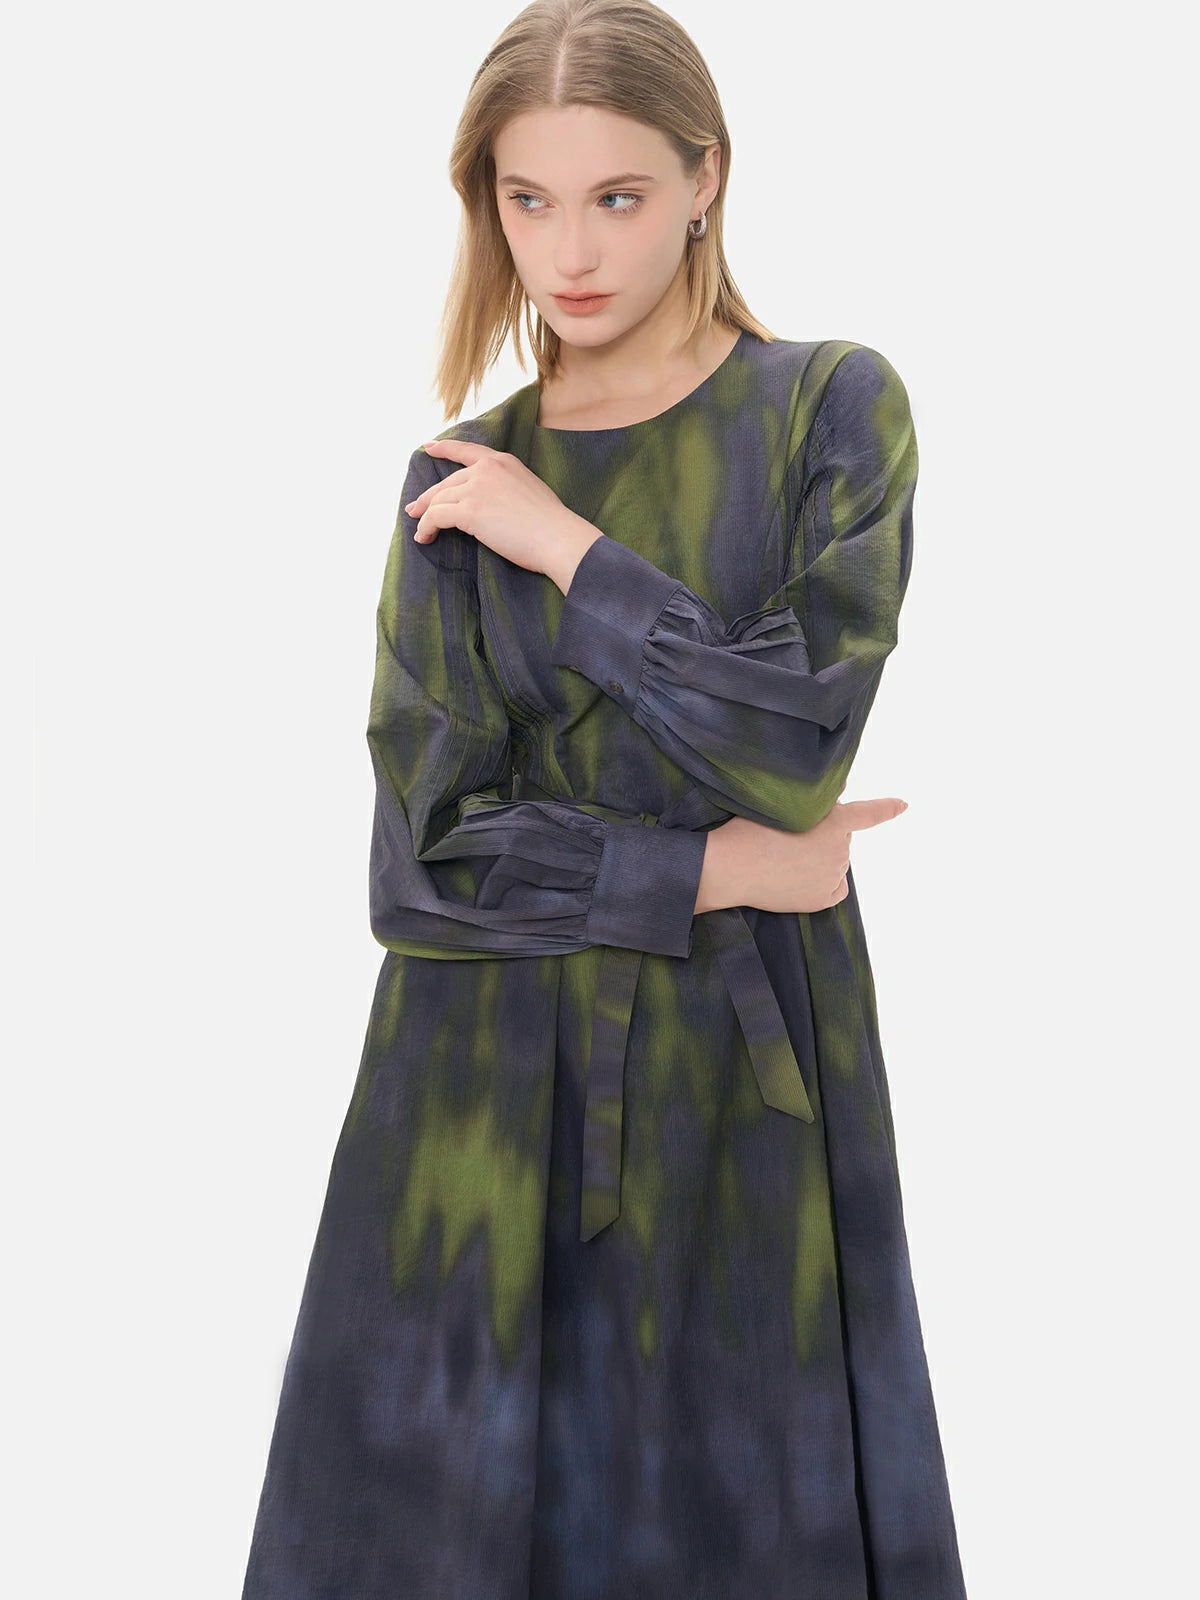 Effortlessly embody fashion versatility with this round-neck dress, a unique gray and green ombre, cinched waist design.